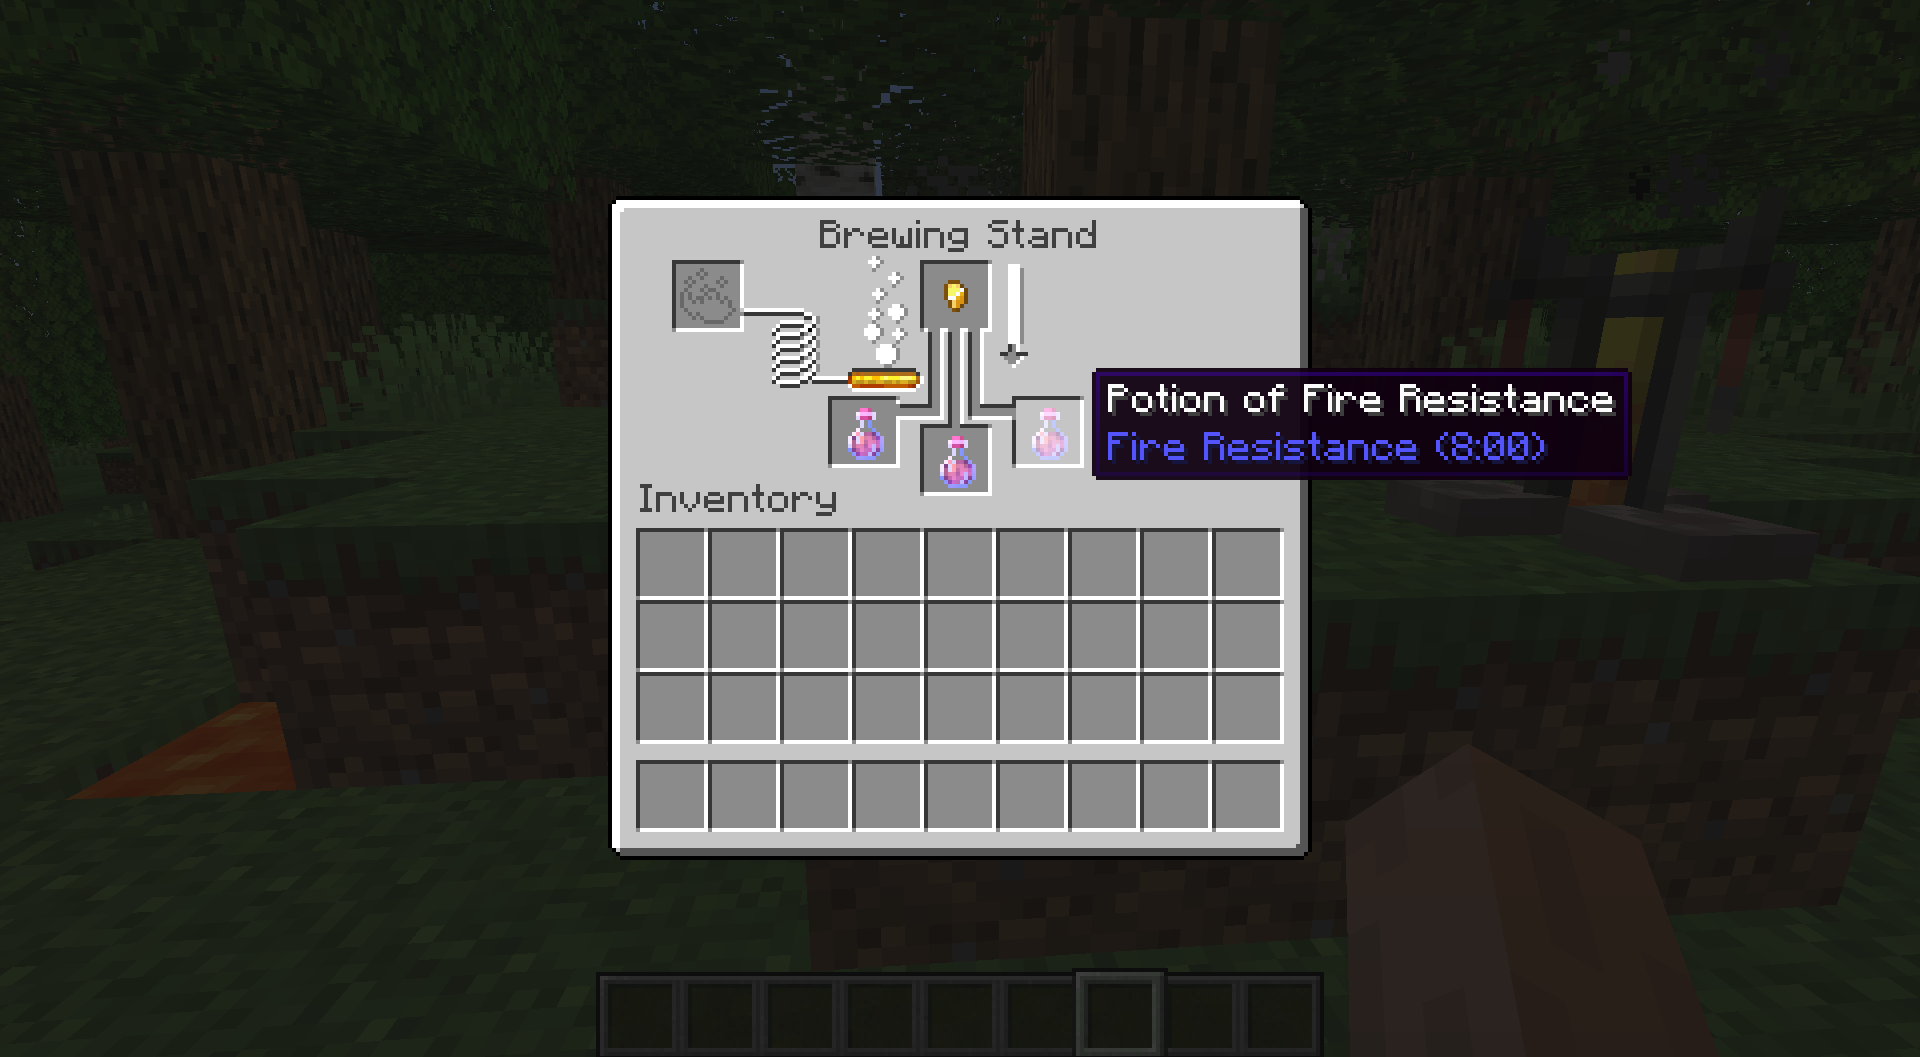 Only craftable with a longer potion (8:00)
Potion from 8:00 to 11:00